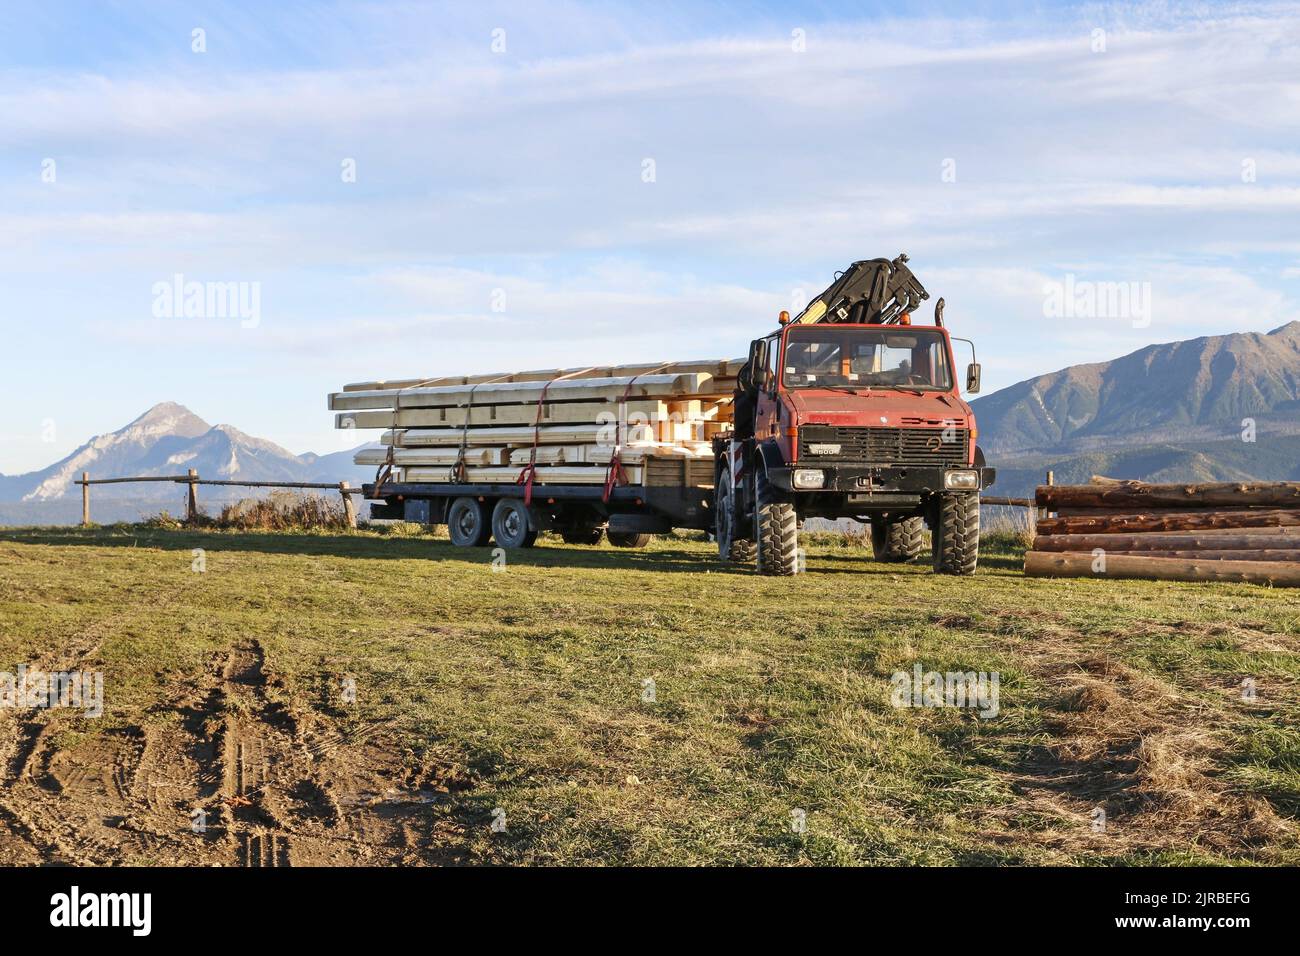 A multi-purpose truck used for transporting wood in the mountains, Zakopane, Poland. Stock Photo